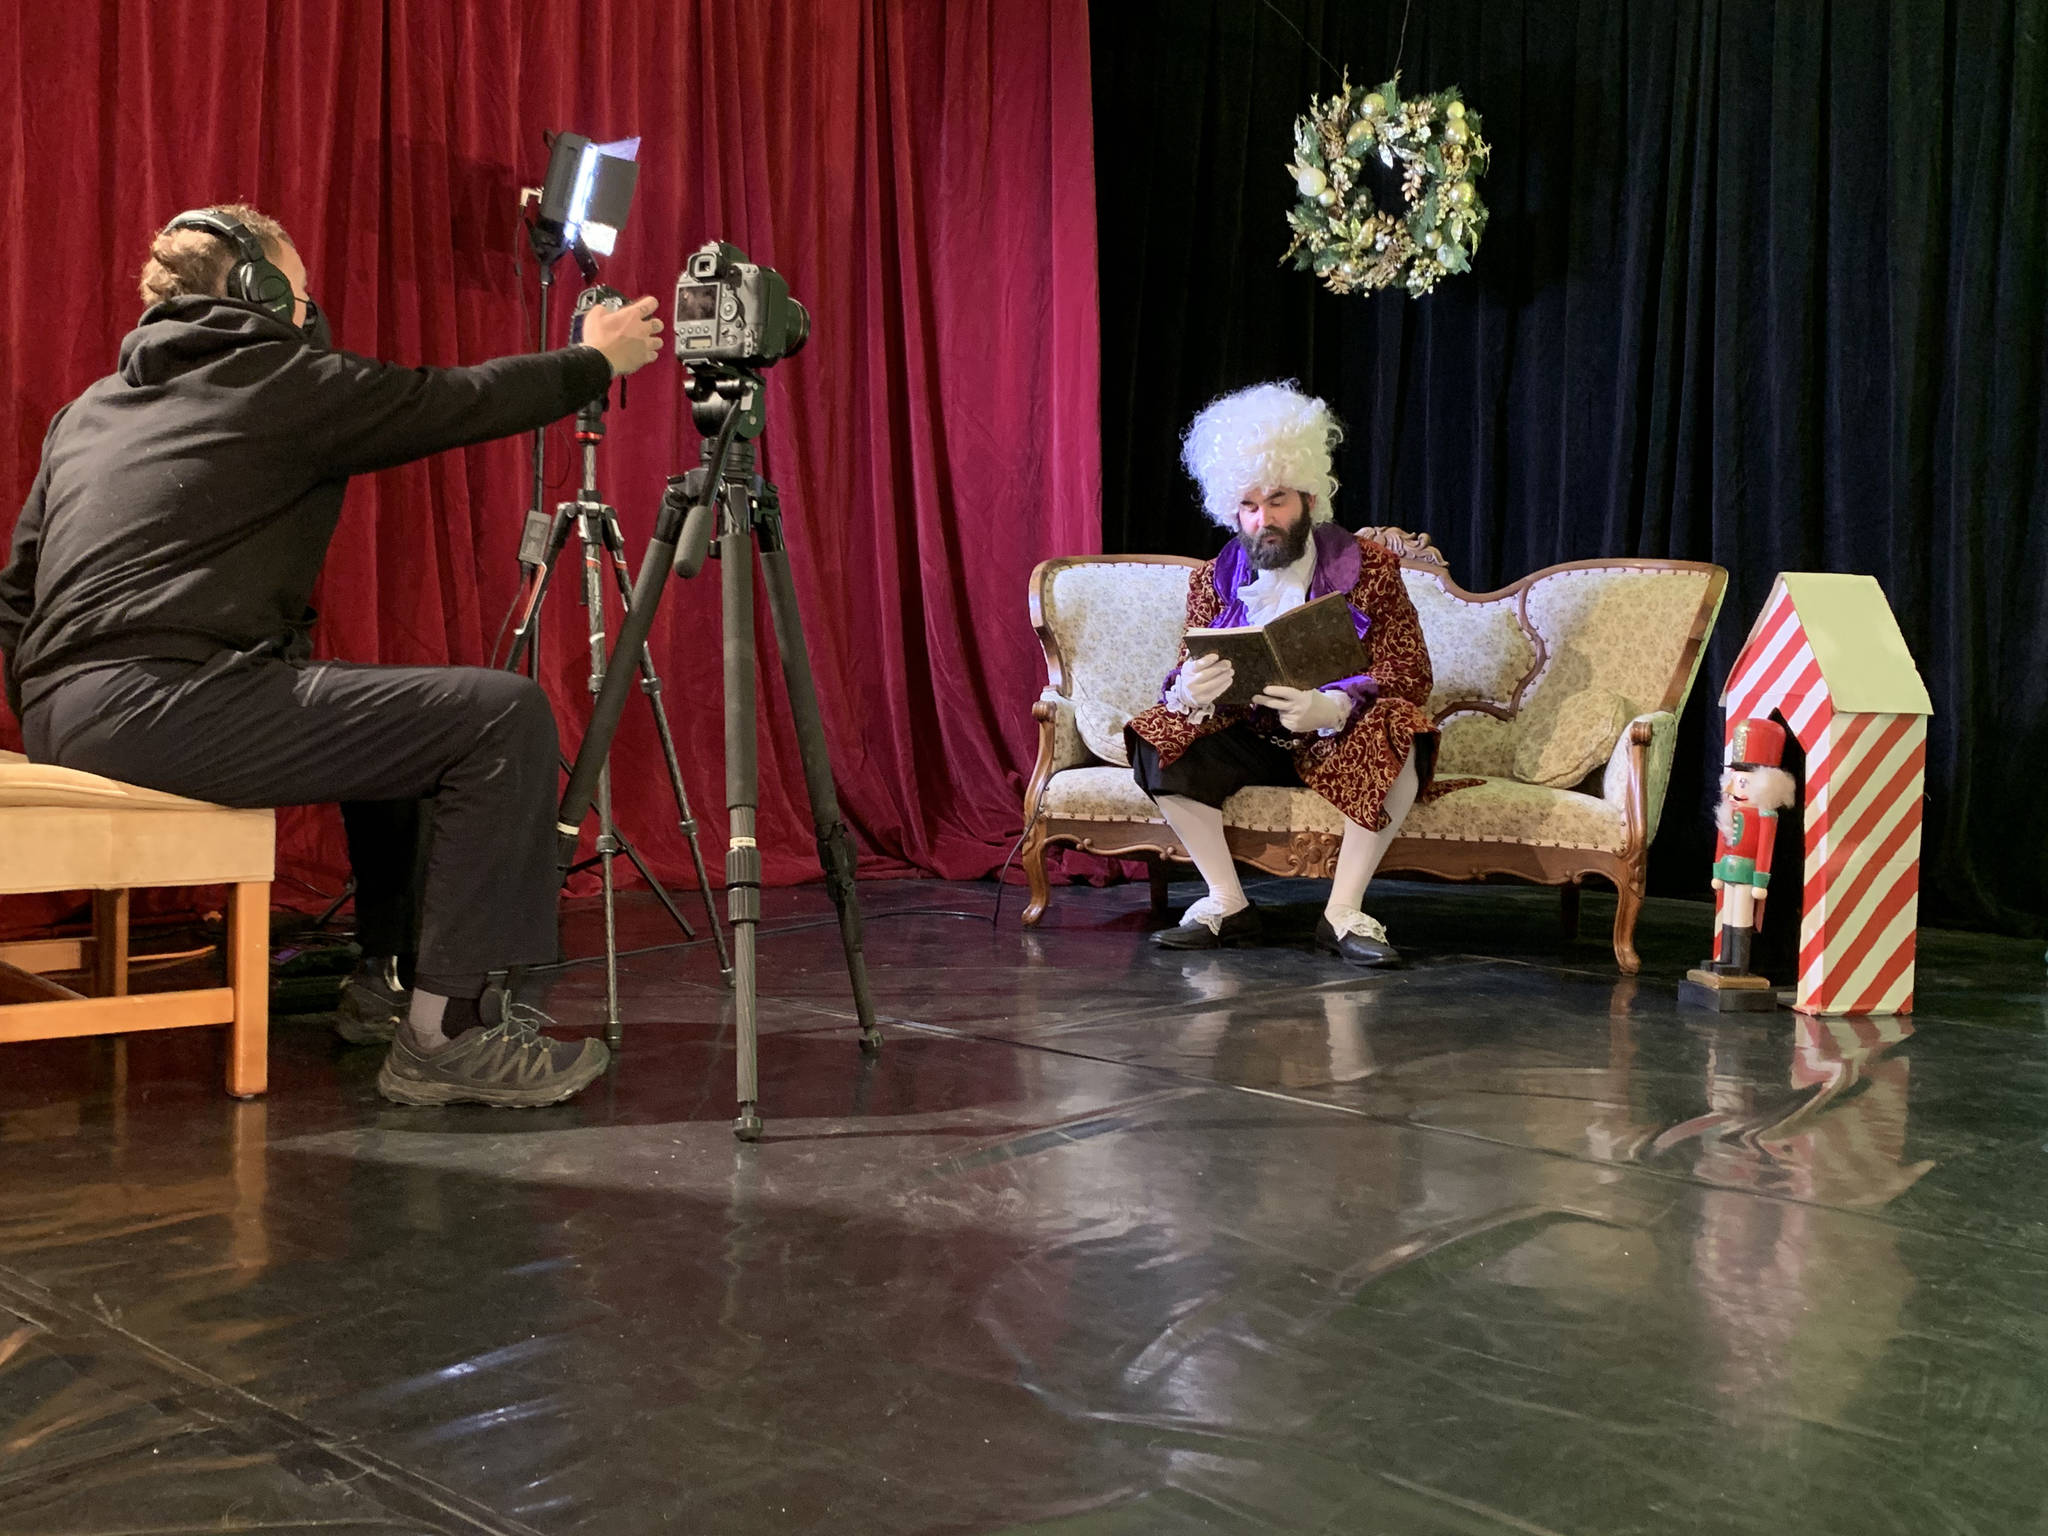 Bjørn Olson, left, films Aaron Walbrecher as Drosselmeyer, right, on Dec. 5, 2020, for a scene in the “Petite Nutcracker Ballet” at the Homer Nutcracker Productions’ black box theater in the Wildberry Building in Homer, Alaska. (Photo by Jennifer Norton)